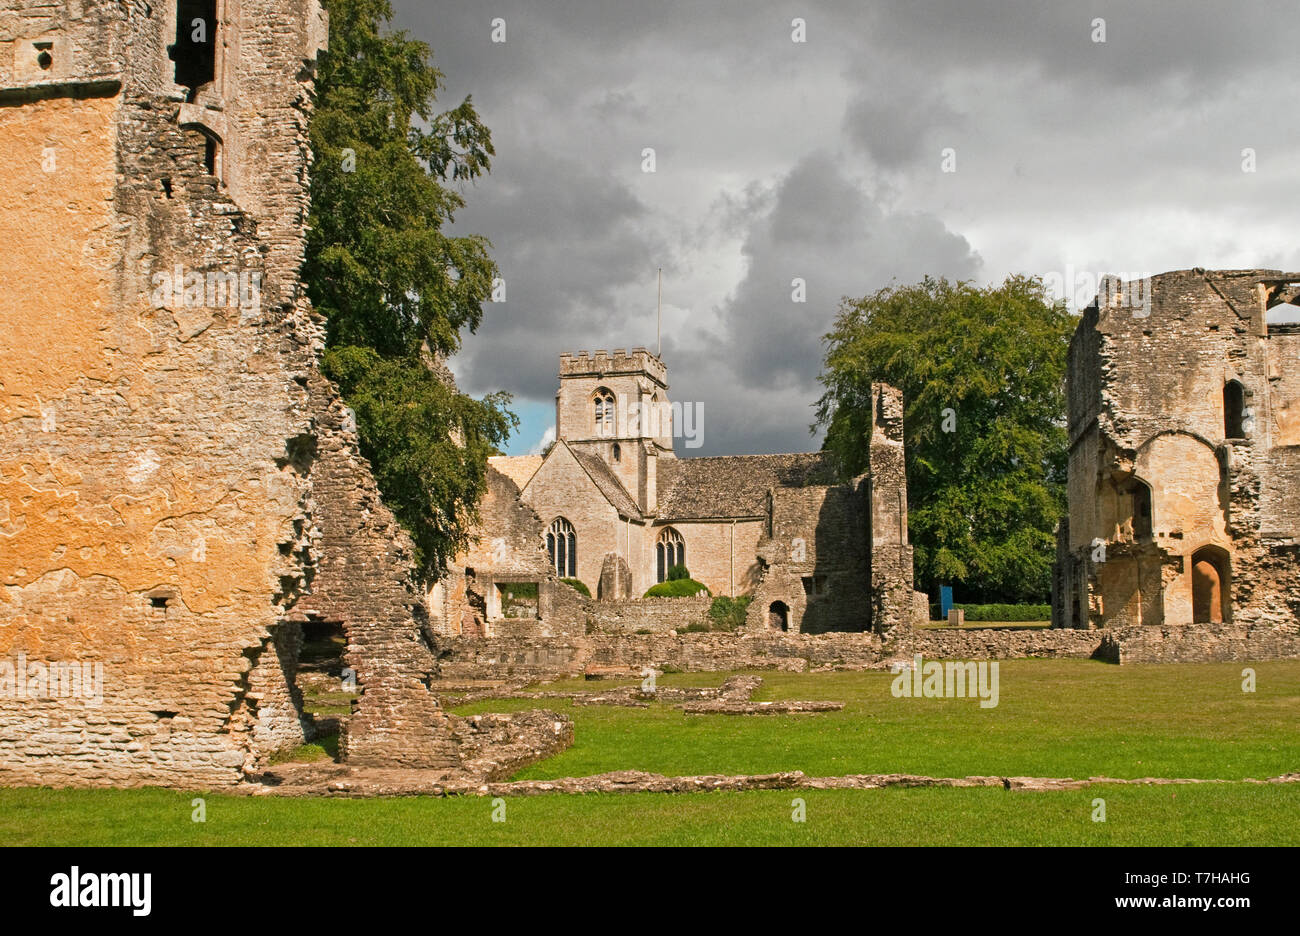 Minster Lovell Hall ruins and Church Cotswolds Oxfordshire. So named after St Kenelm's Minster, the village church. Stock Photo